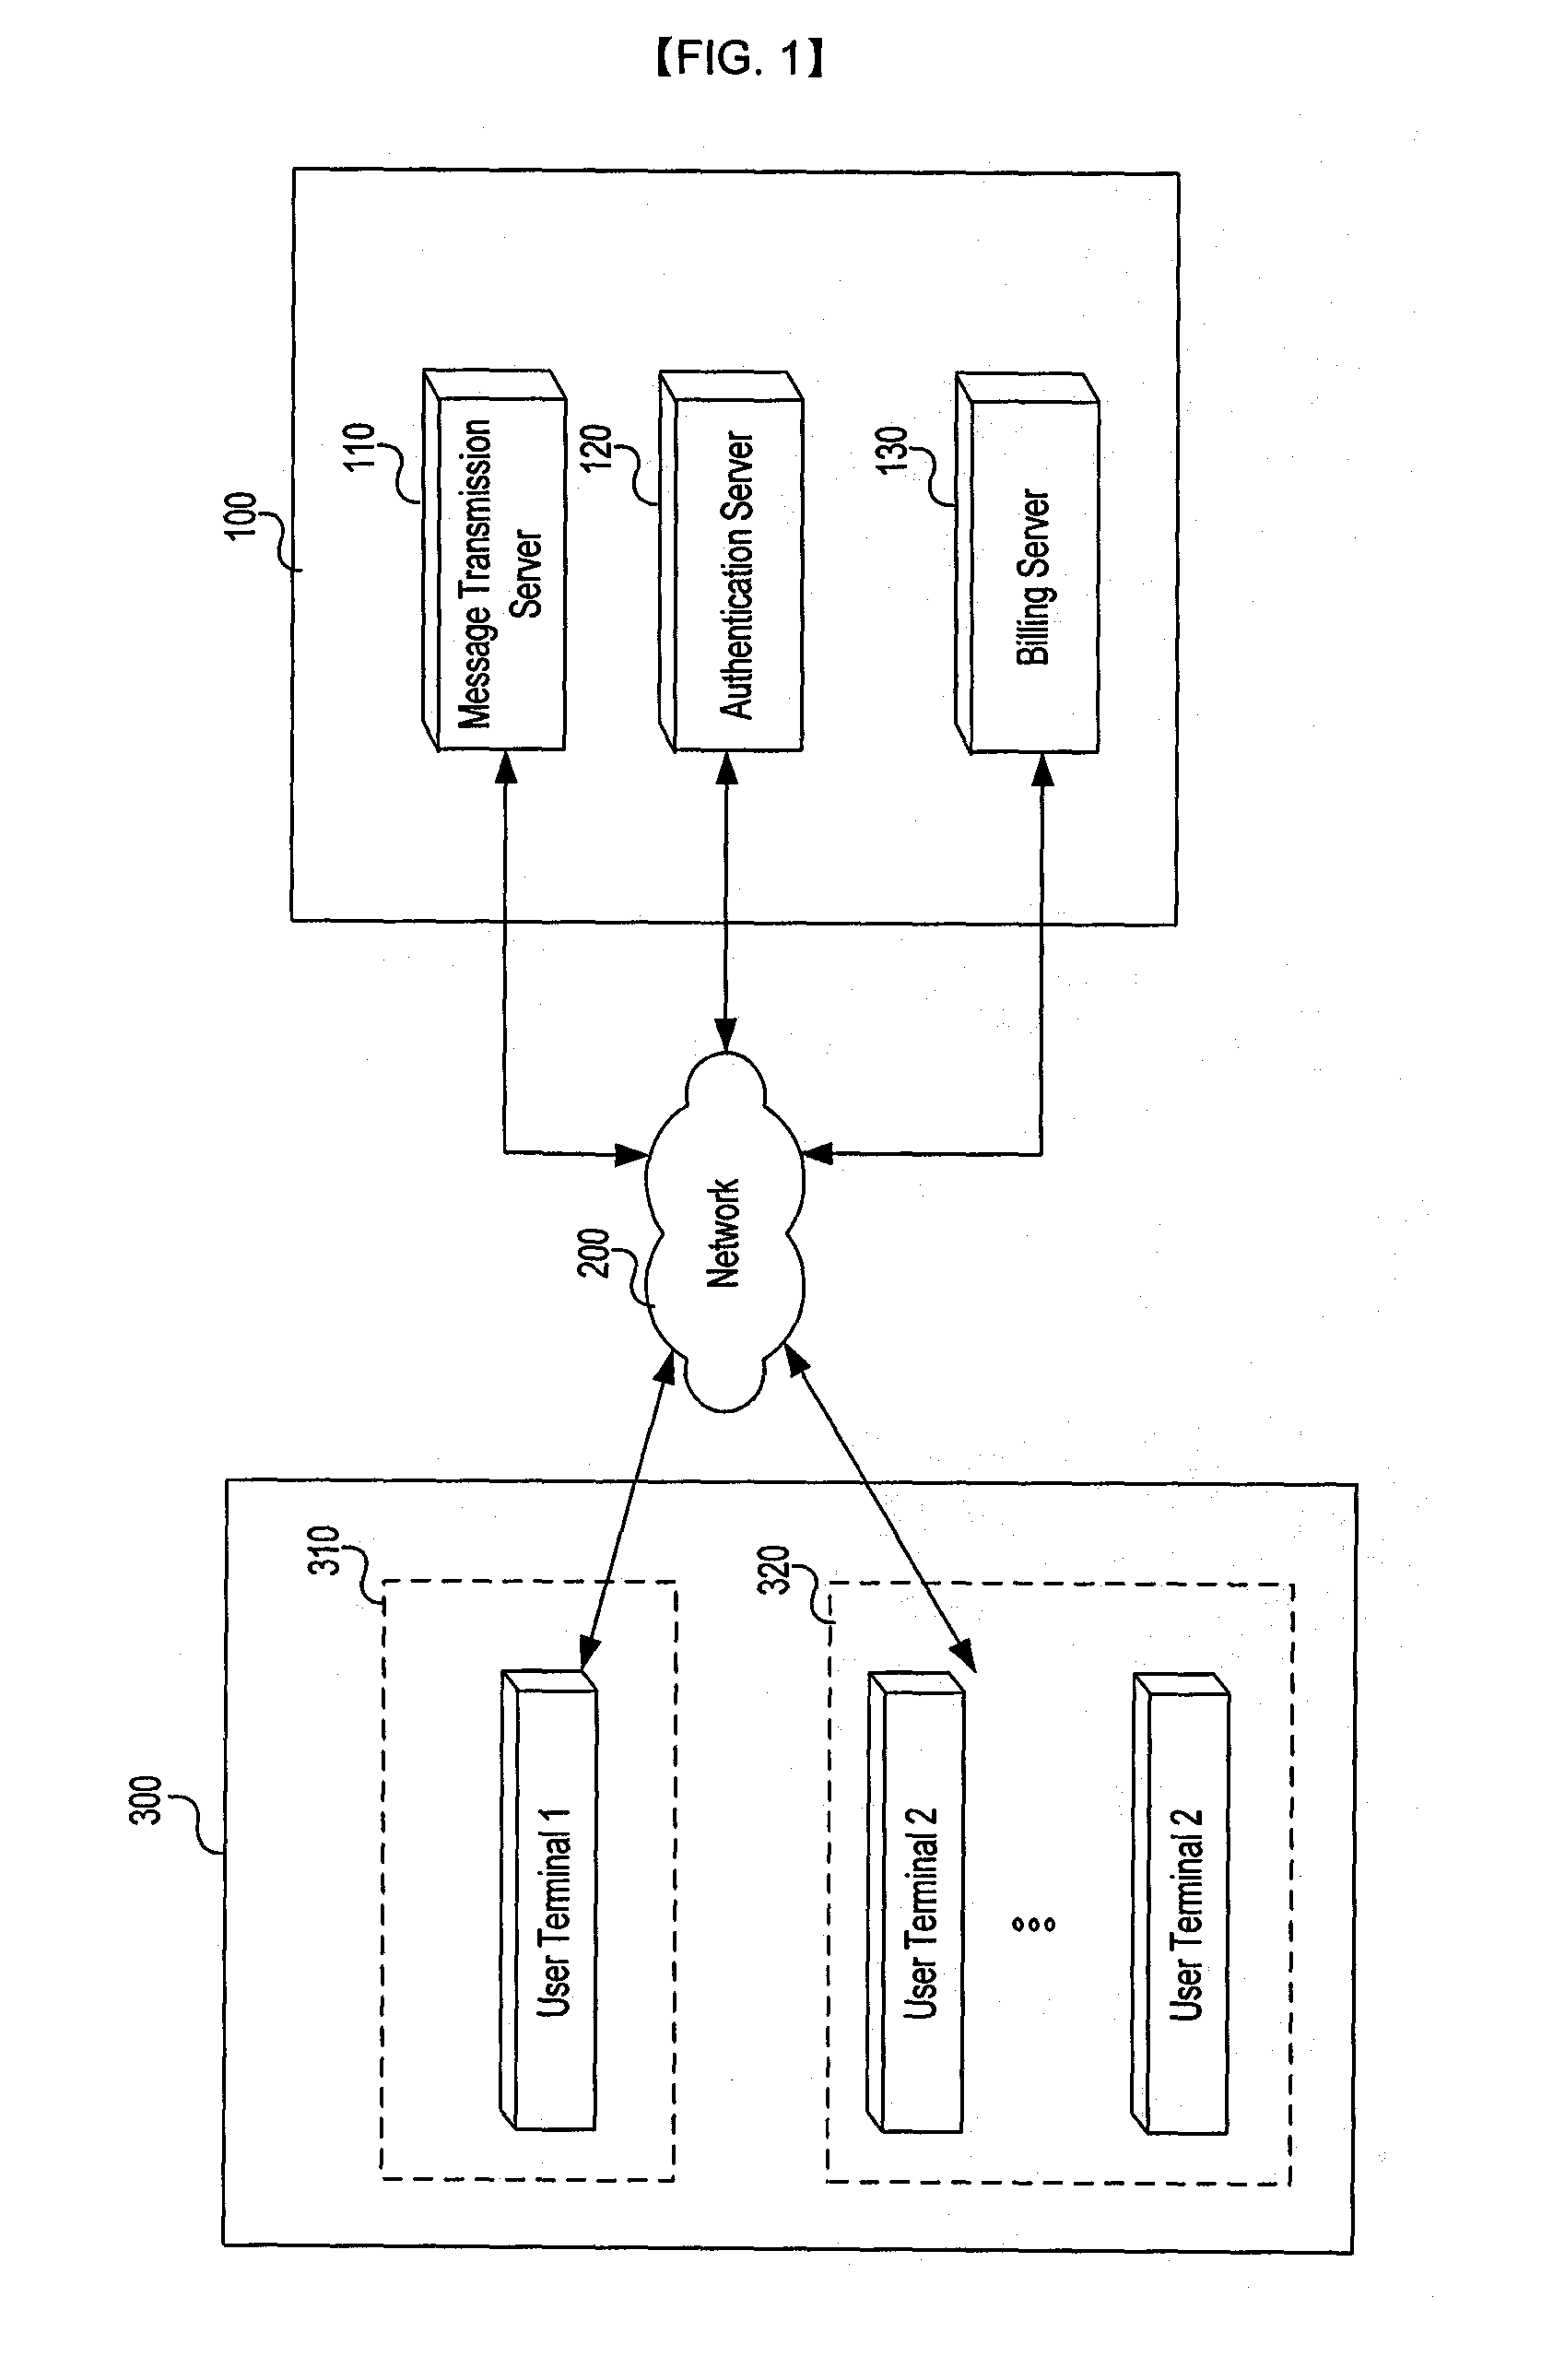 System and Method for Providing Bidirectional Message Communication Services with Portable Terminals